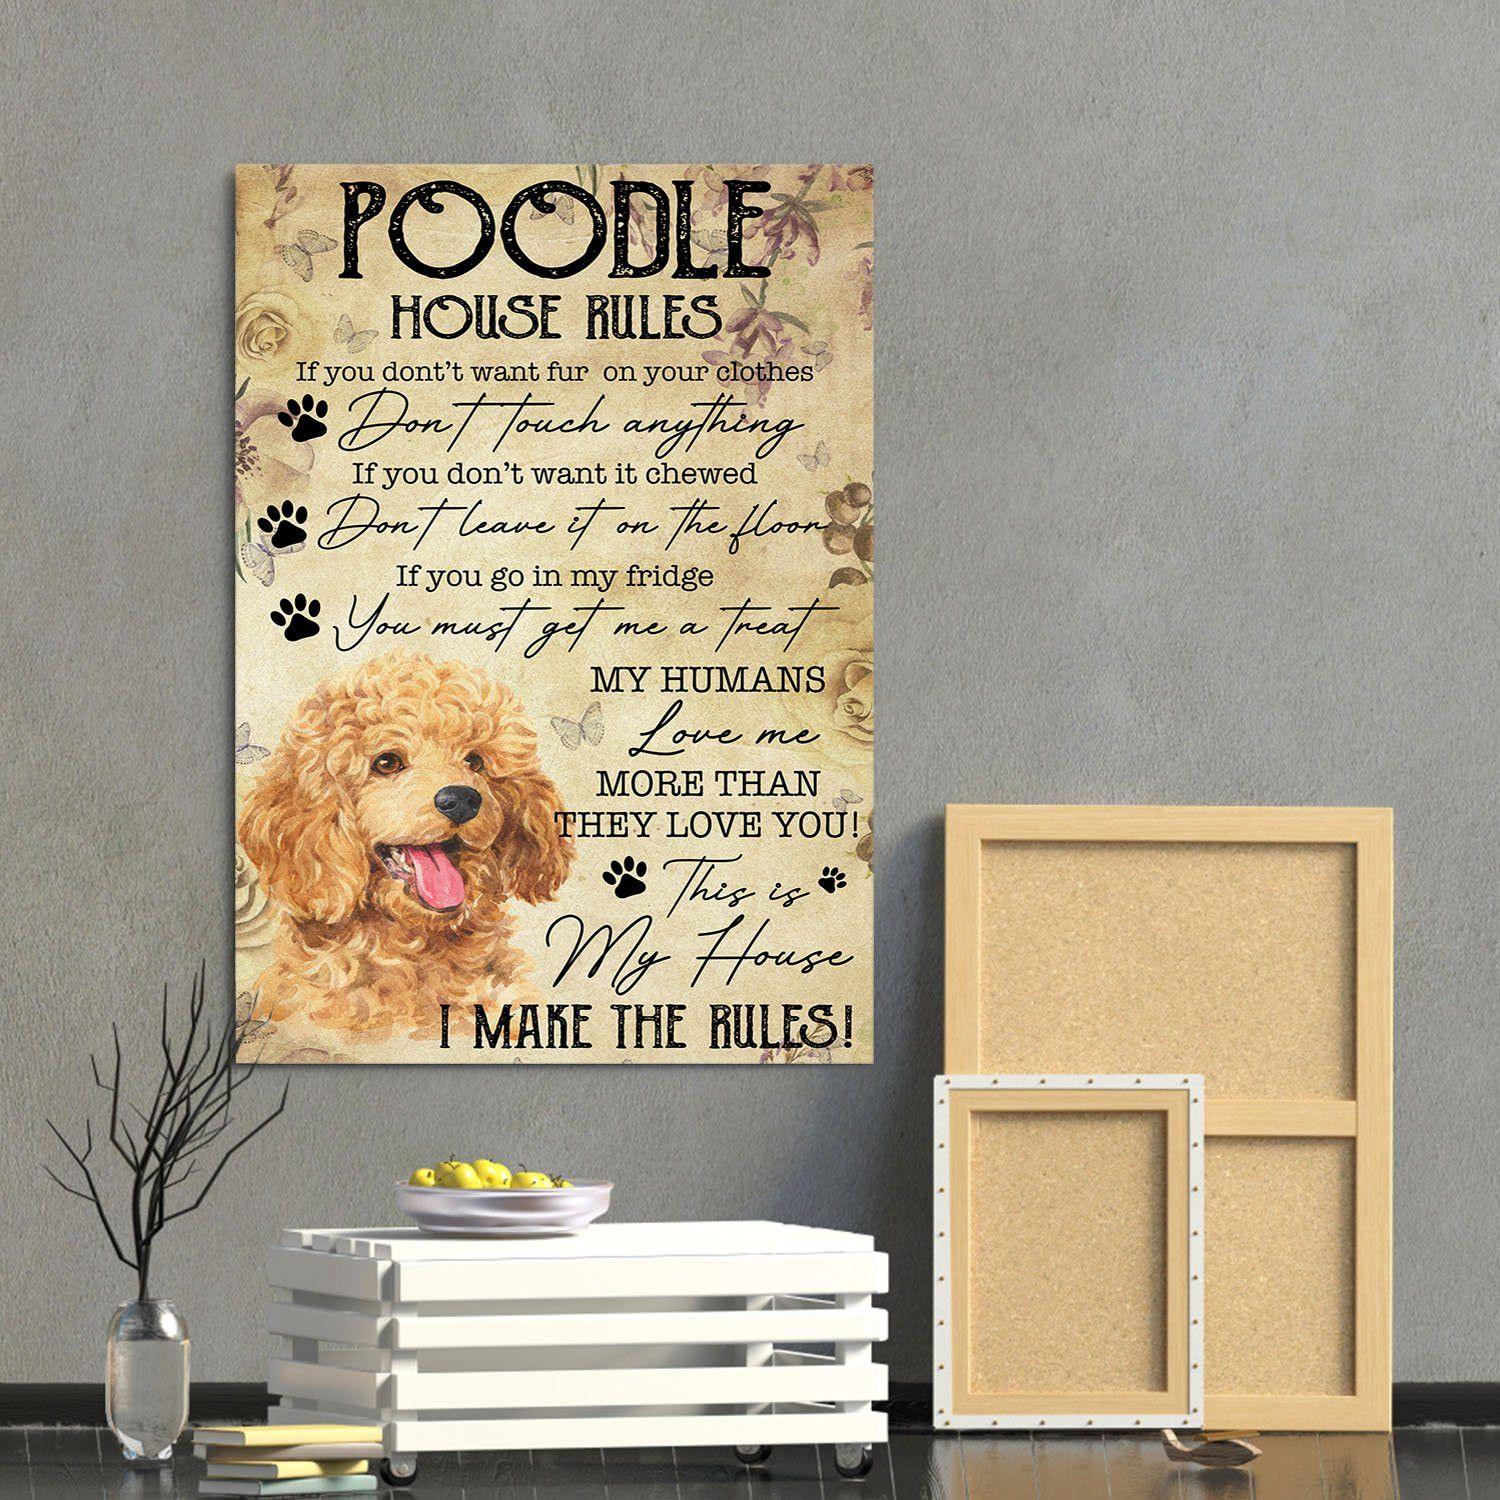 Poodle Portrait Canvas - Poodle House Rules - Gift For Dog Lovers, Family, Friends Portrait Canvas, Wall Decor Visual Art - Amzanimalsgift